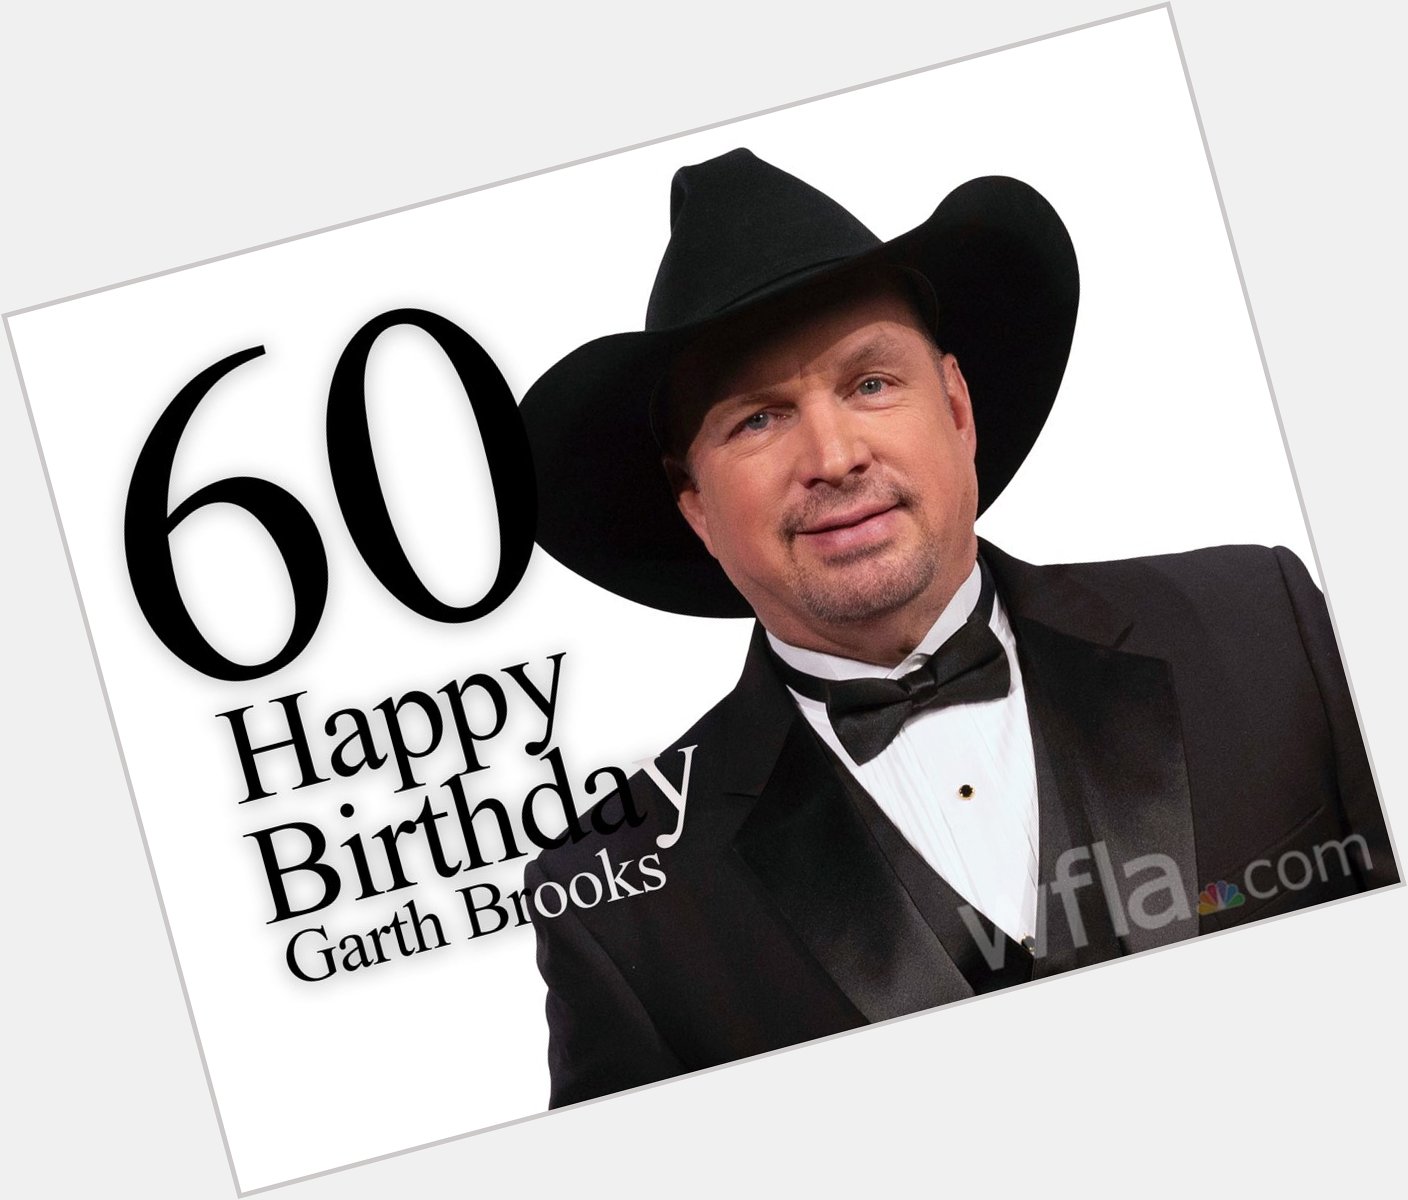 Join us in wishing a happy 60th birthday to country singer Garth Brooks!  